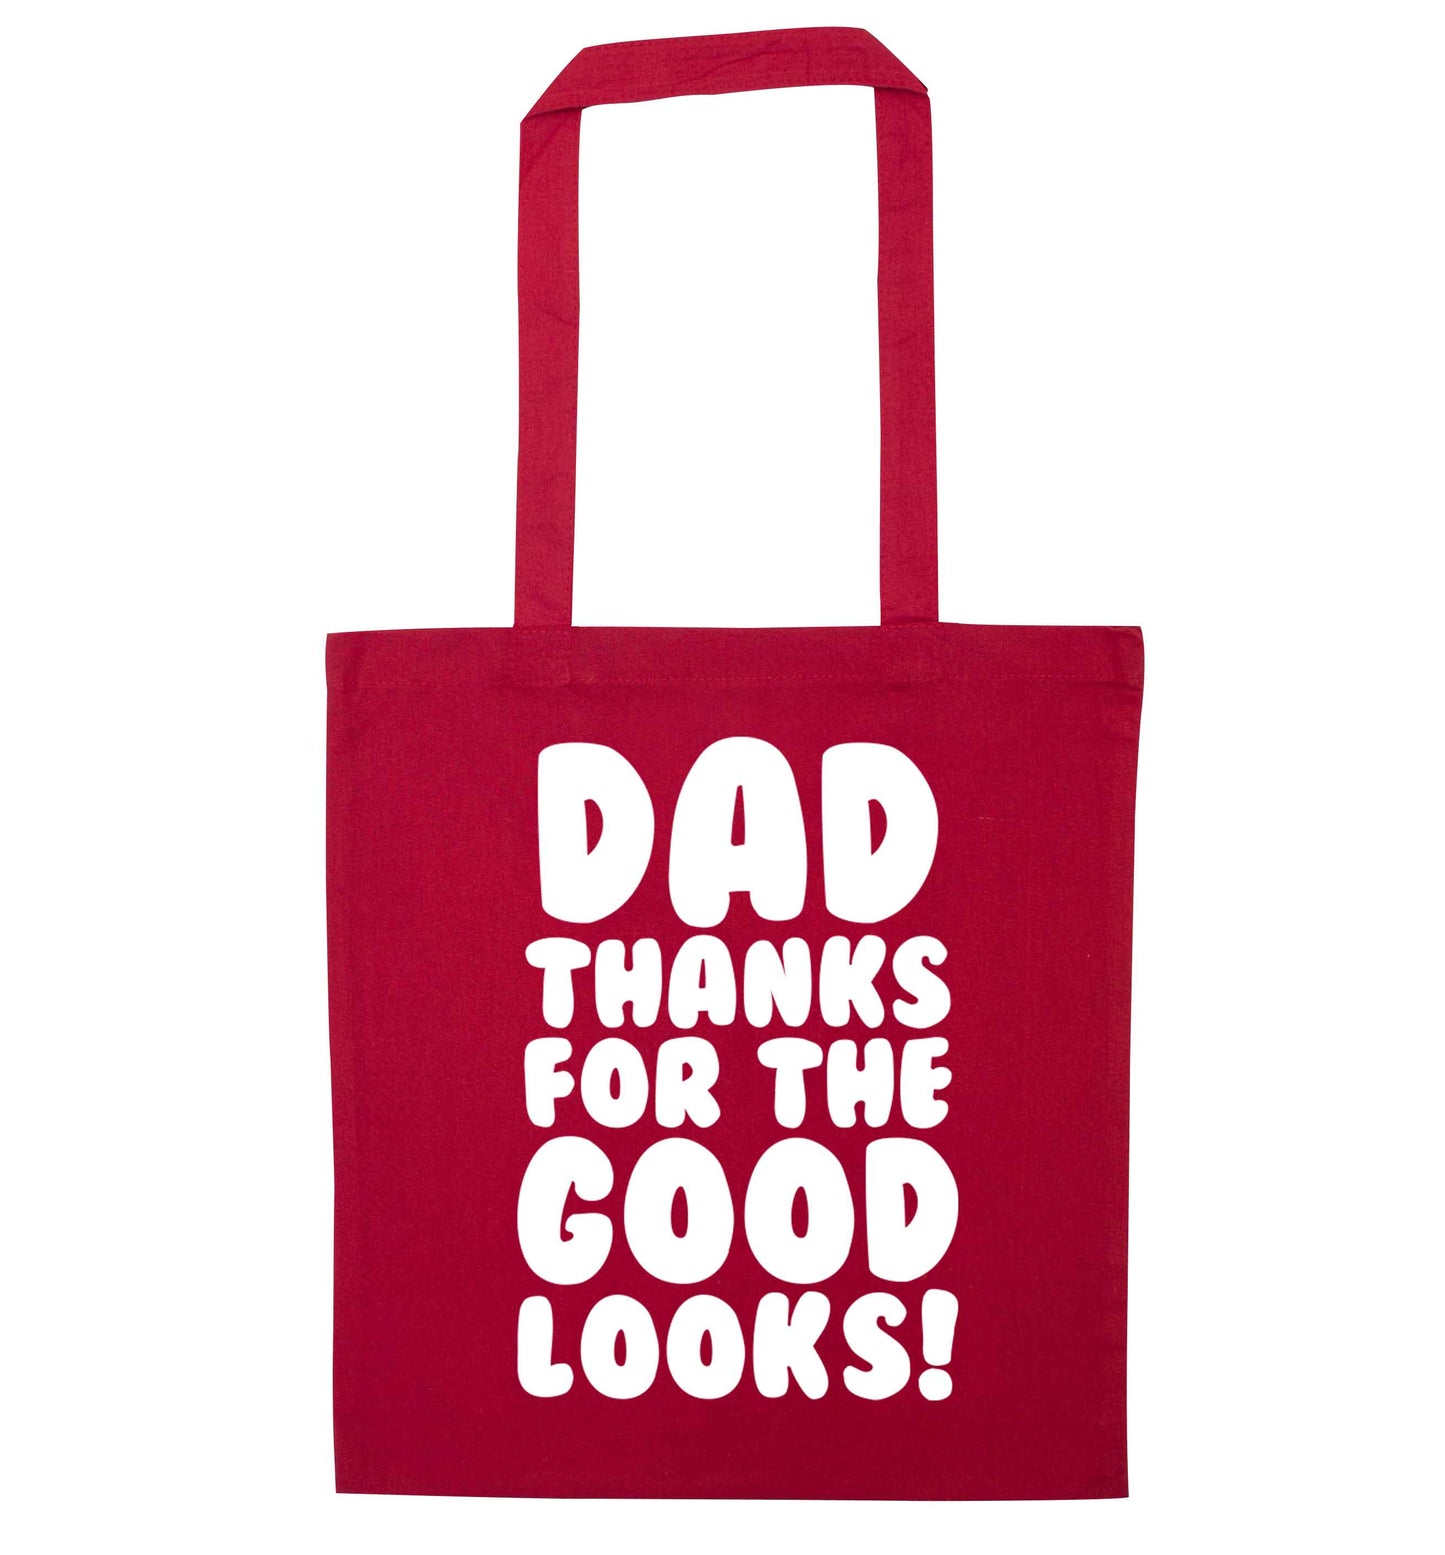 Dad thanks for the good looks red tote bag